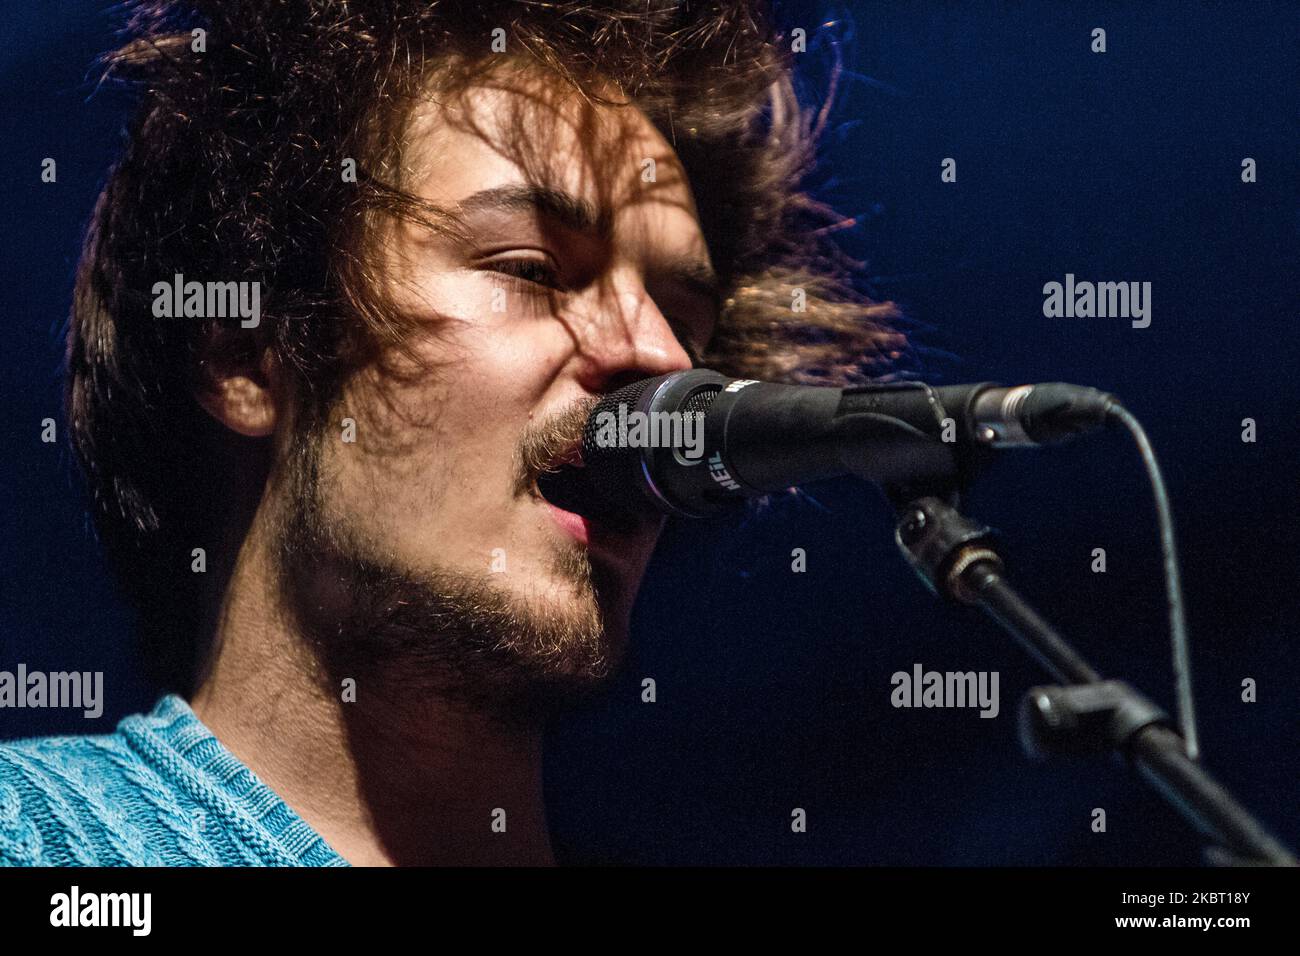 Clemens Rehbein of Milky Chance performs live at Carroponte in Milan, Italy, on July 30 2014 (Photo by Mairo Cinquetti/NurPhoto) Stock Photo